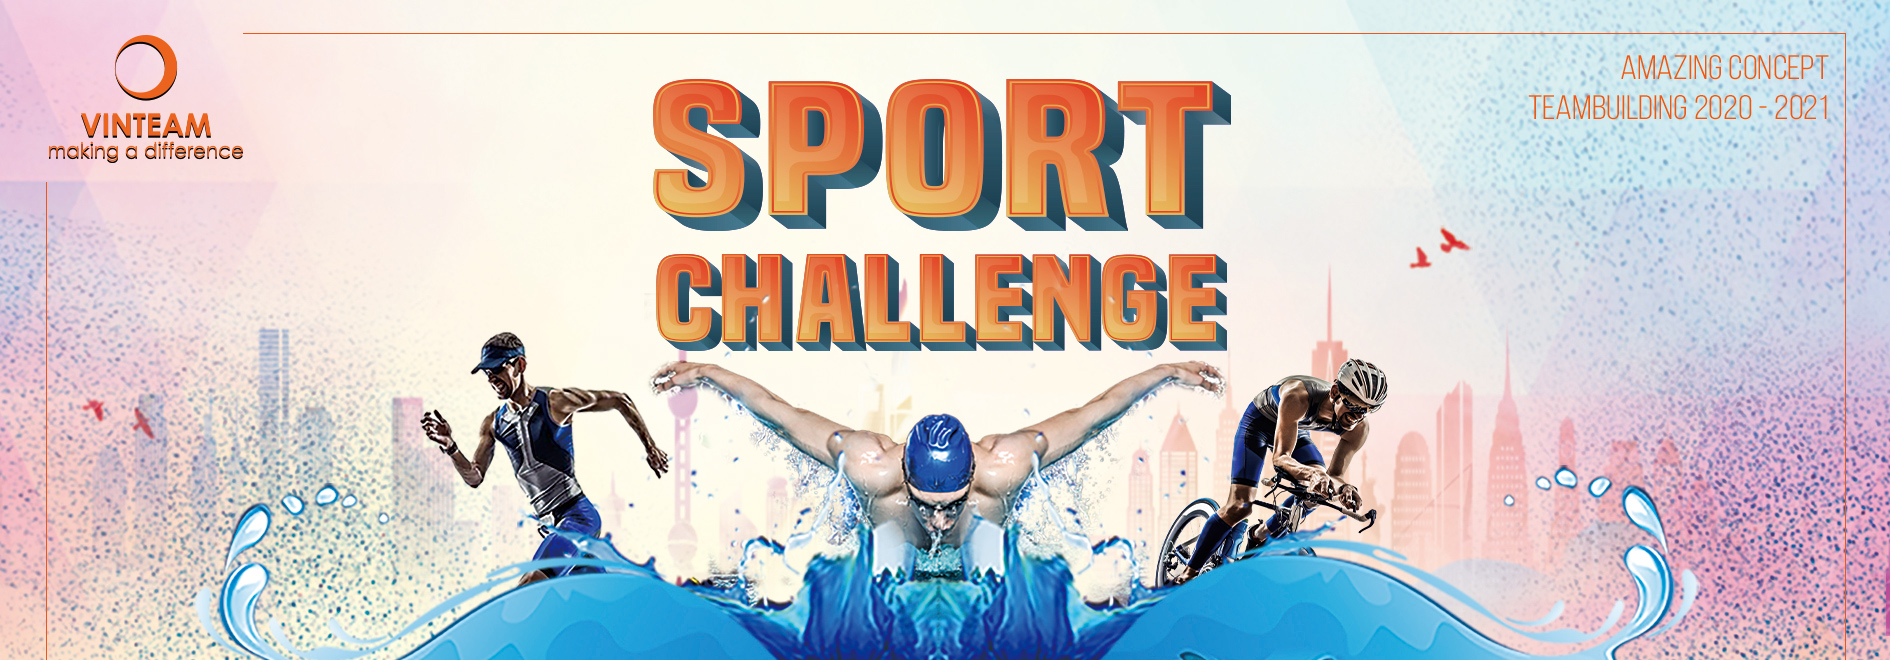 5-COVER-SPORT-CHALLENGE